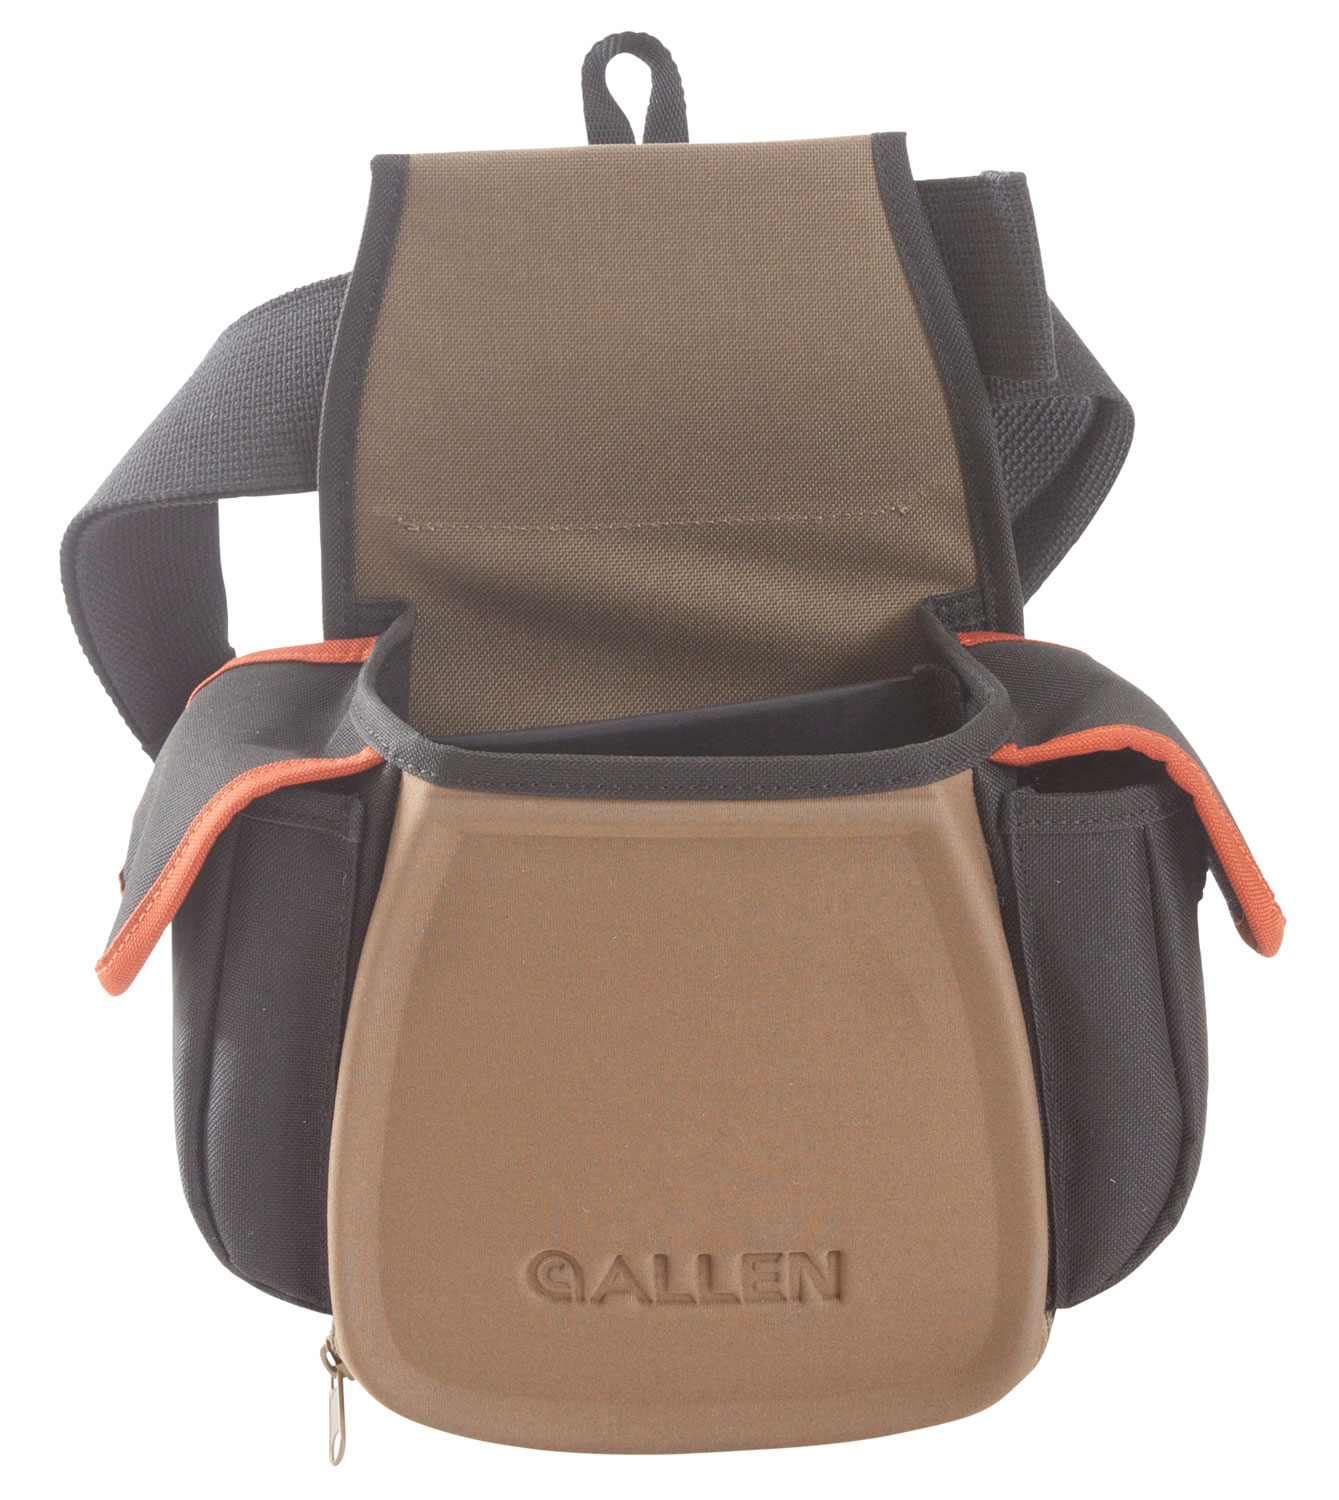 Allen 8306 Eliminator Pro Double Compartment Shooting Bag Black with Tan & Rust Accents, Elastic Loops, Side Pockets & D-Ring 7